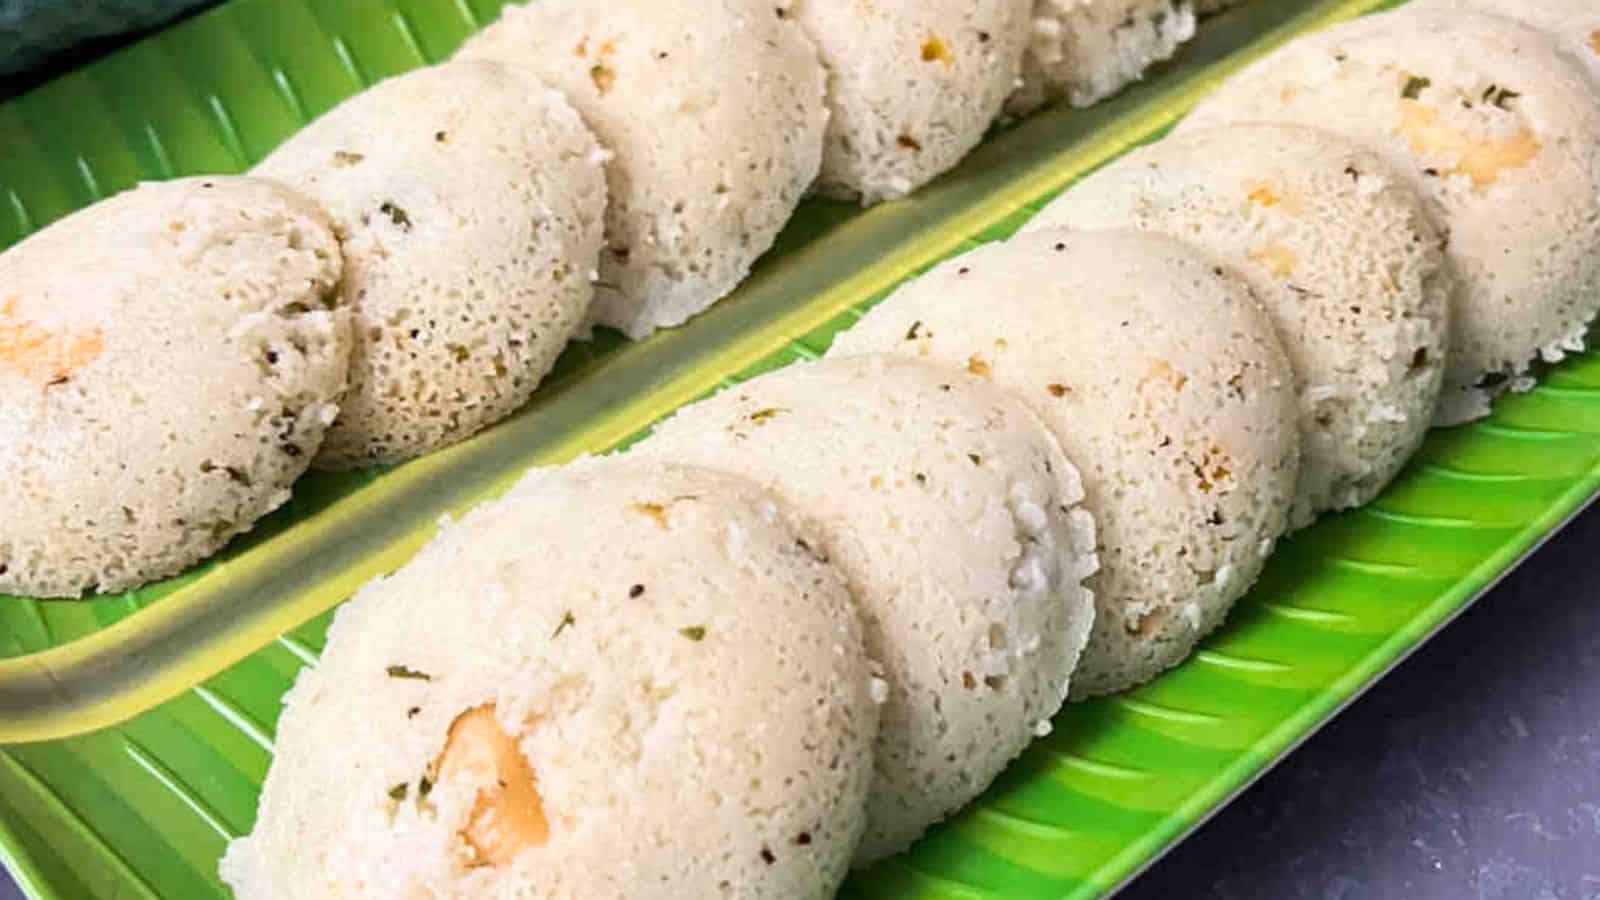 A row of idli, a traditional south indian steamed rice cake, served on a green banana leaf.